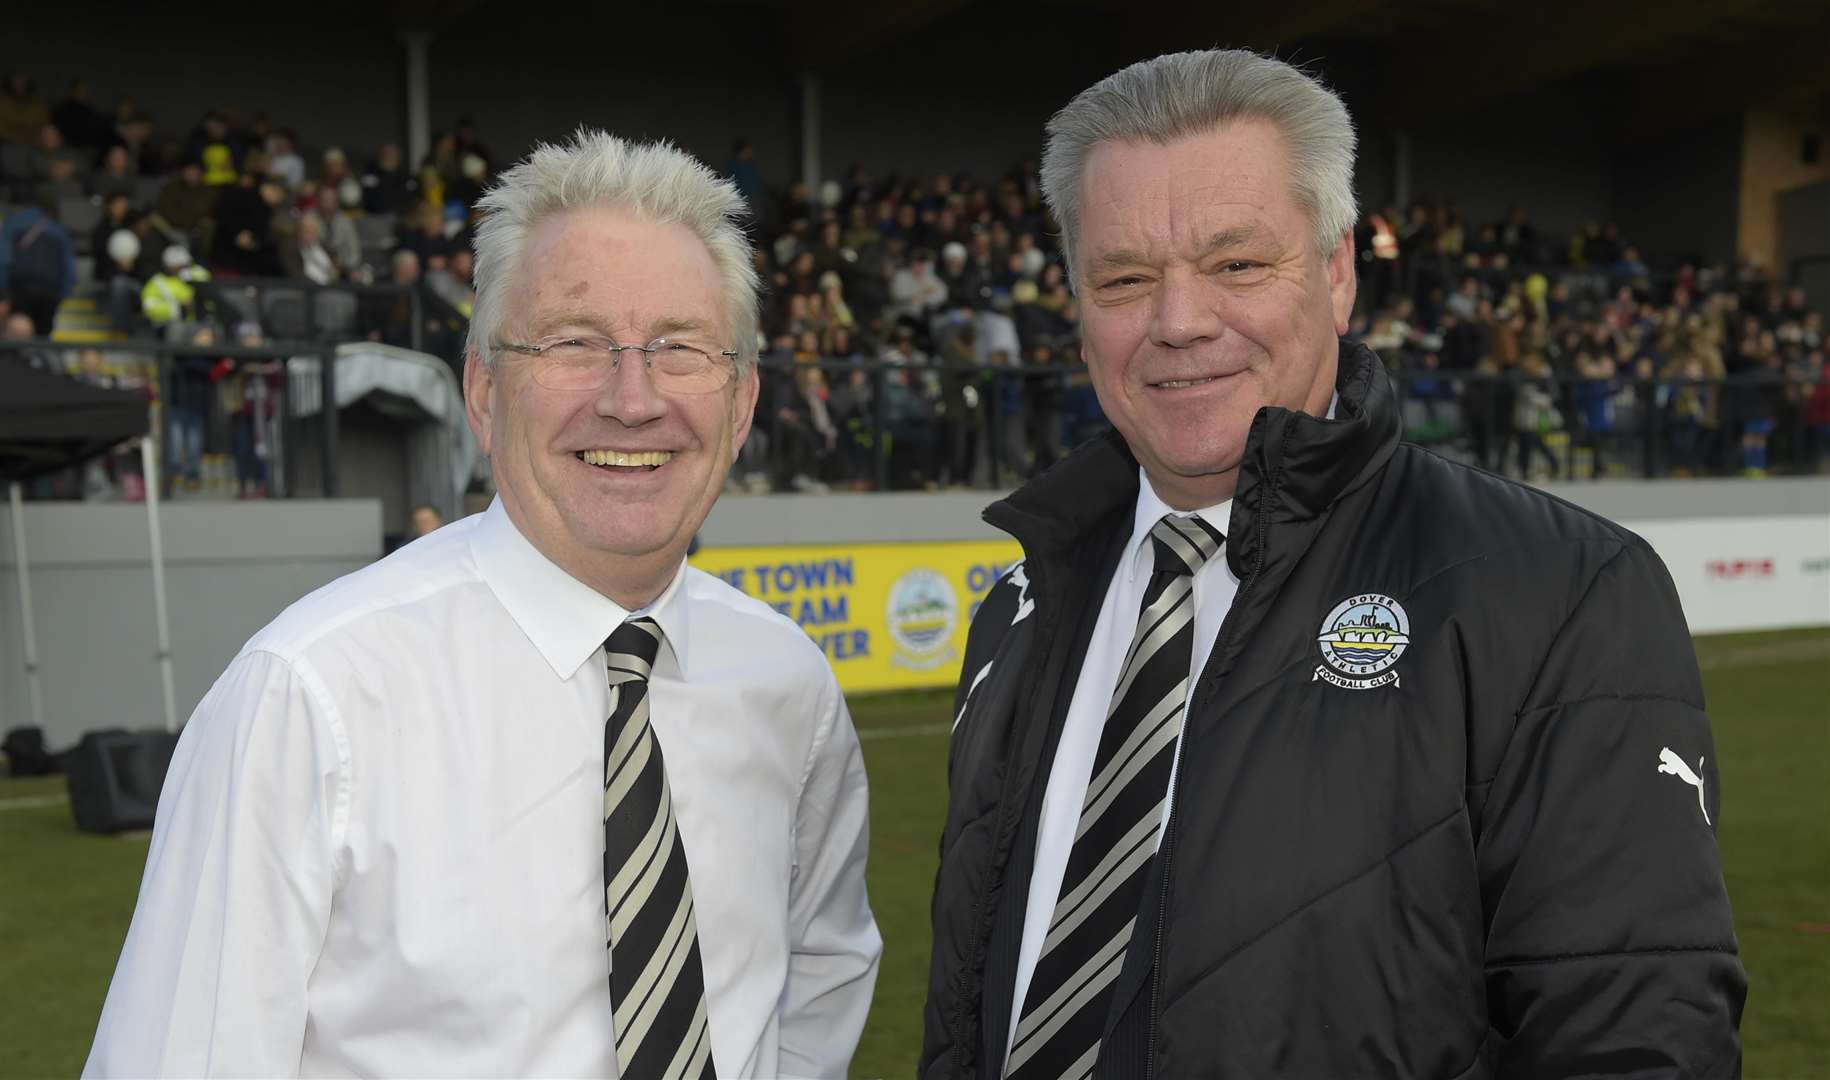 Chris Kinnear and Dover chairman Jim Parmenter at the opening of the club's new stand in November 2016. Picture: Tony Flashman